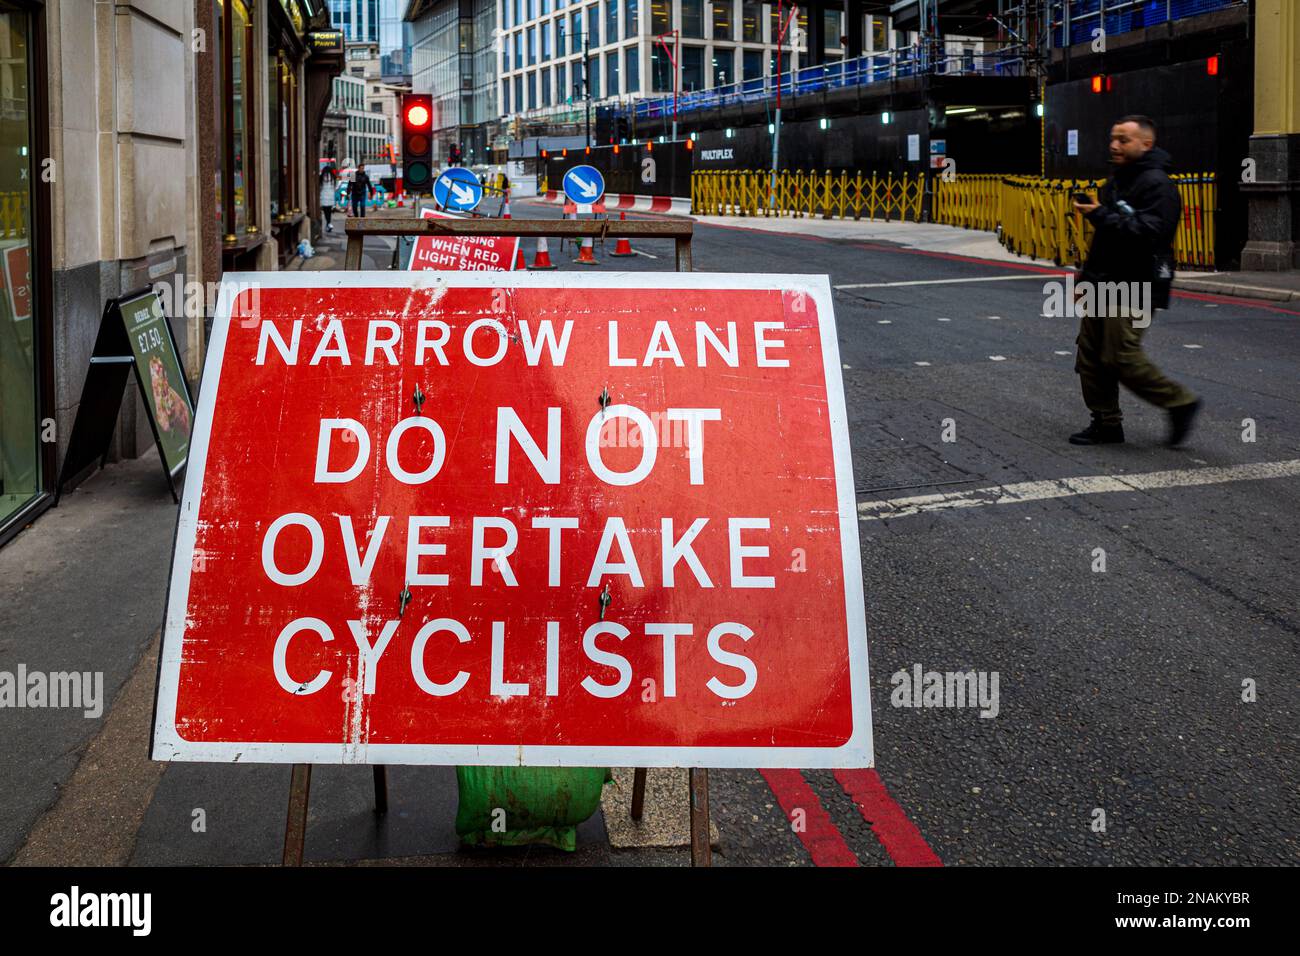 Do Not Overtake Cyclists Sign on a narrow lane in London. Narrow Lane Do Not Overtake Cyclists Sign in central London UK. Stock Photo